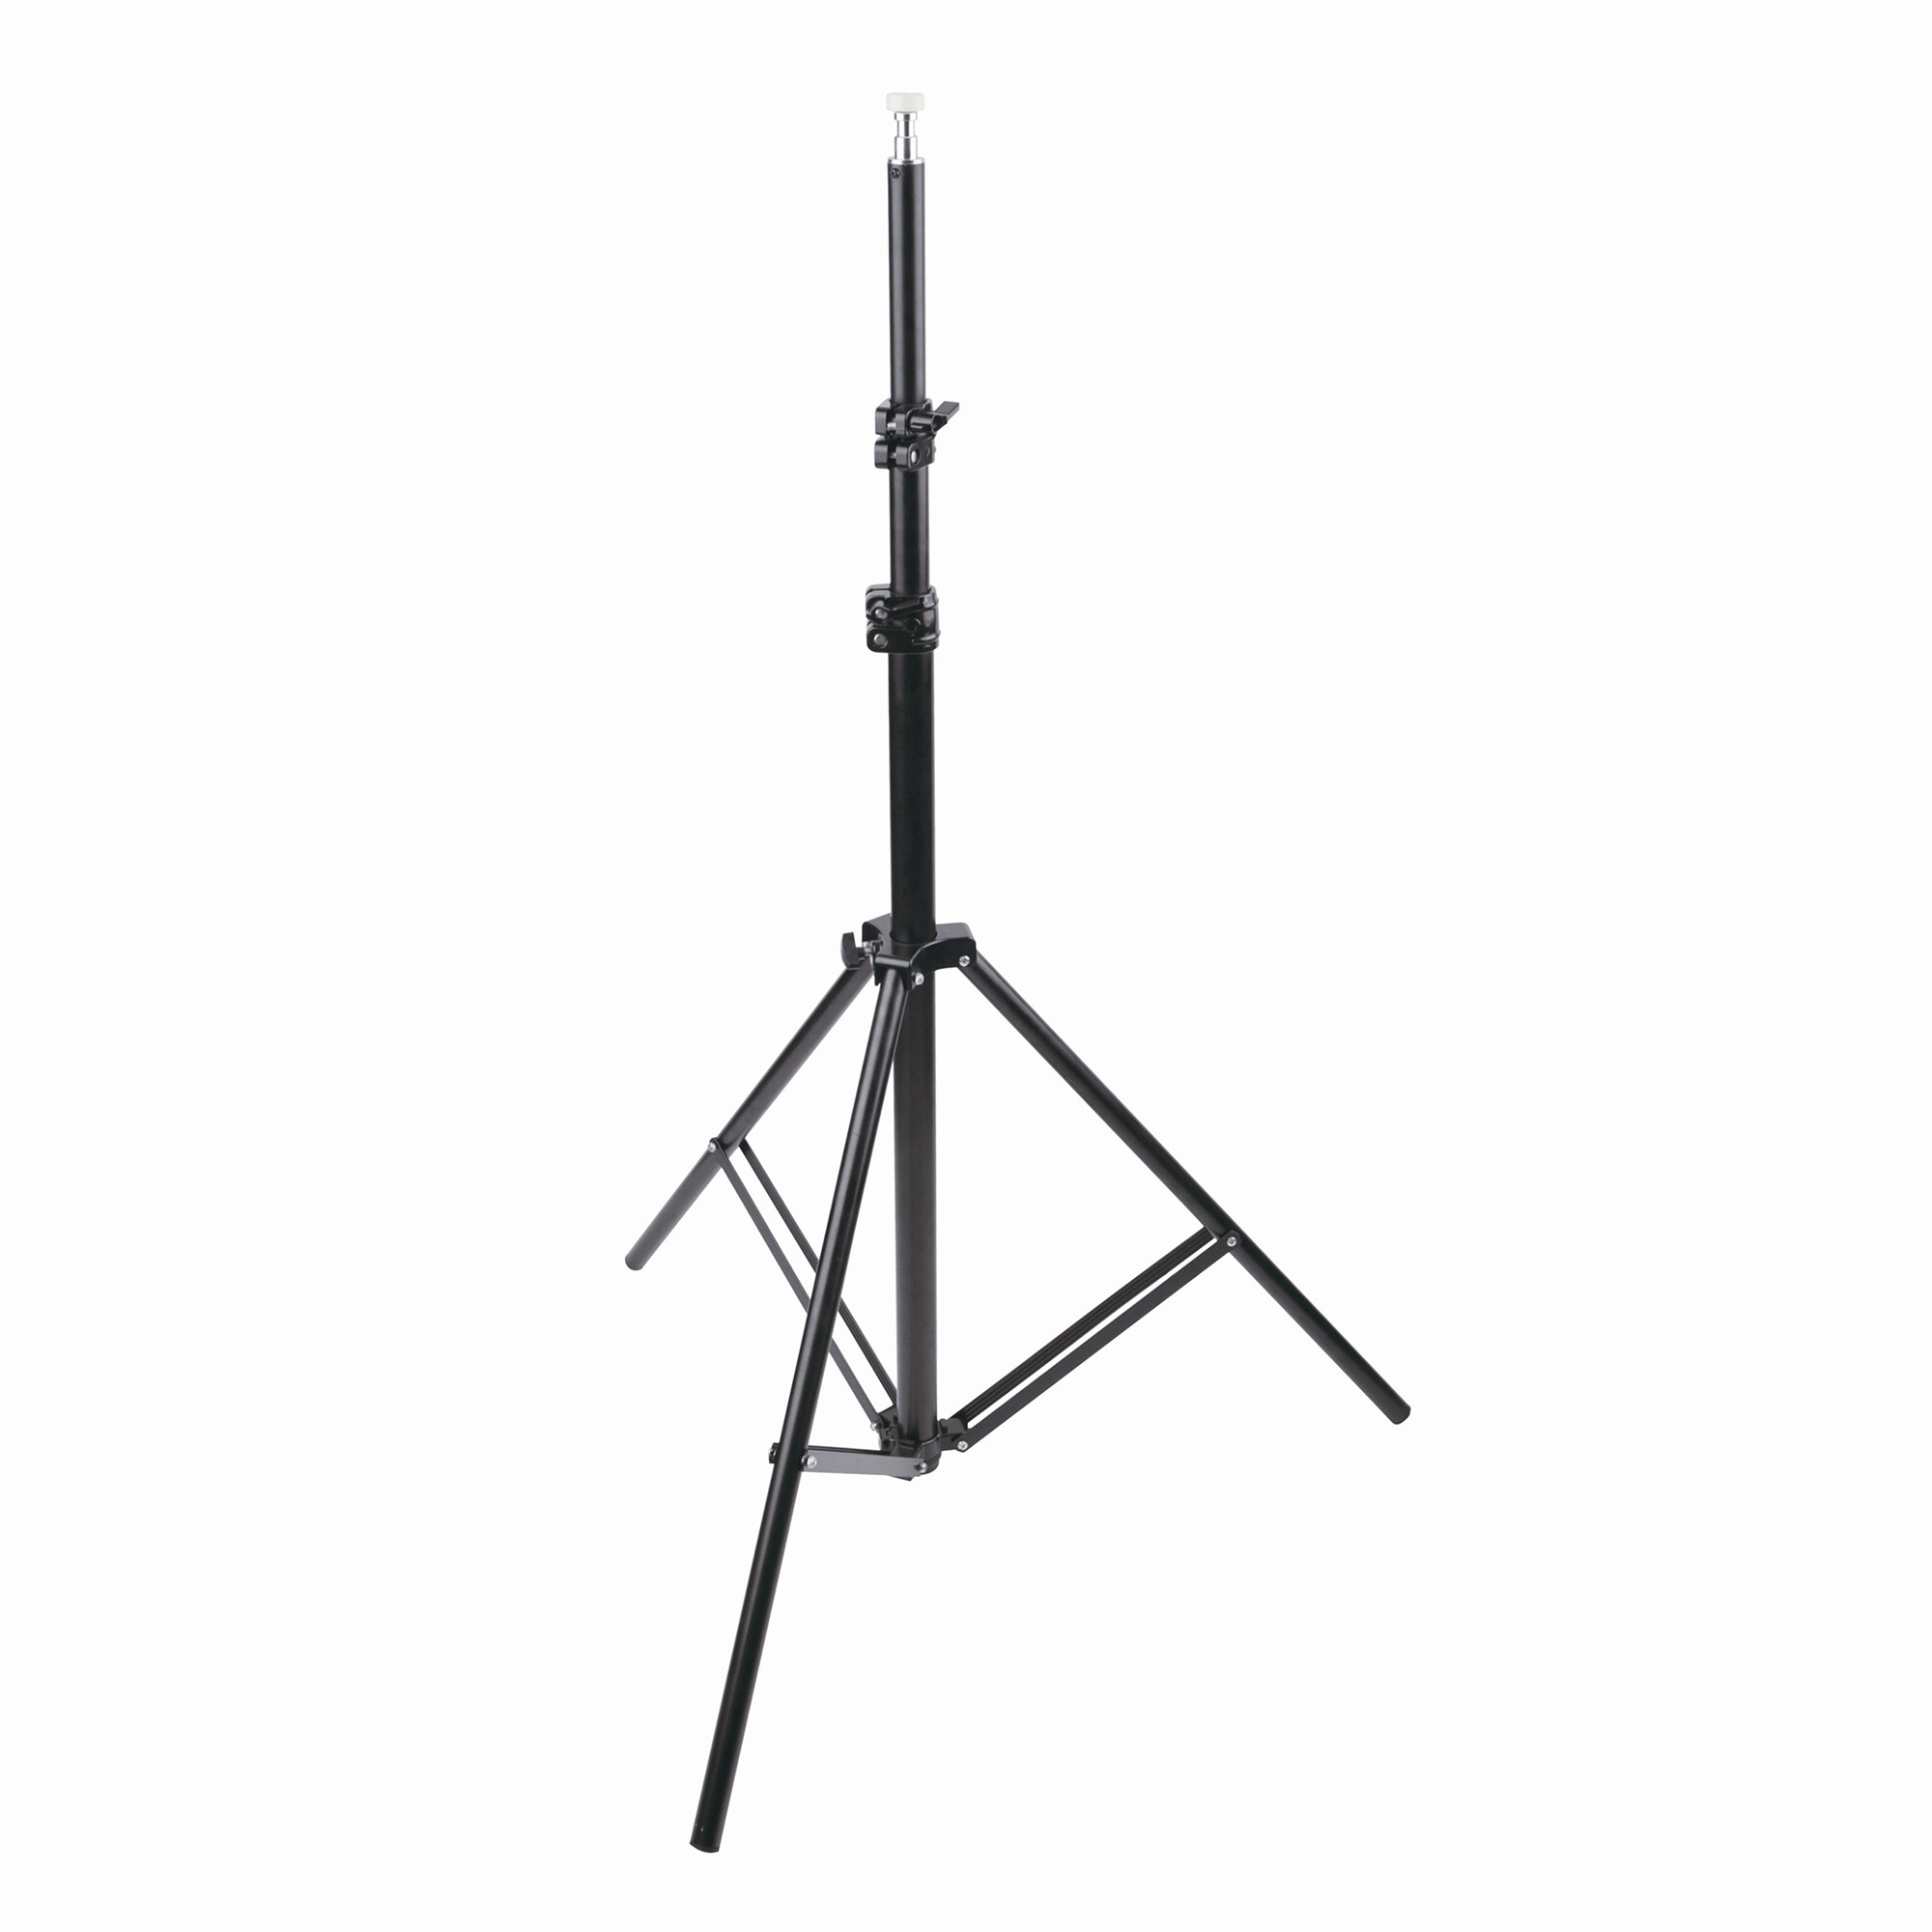 256cm LS-256T Adjustable Steel Structure Tripod  For Studio Lighting And Photography